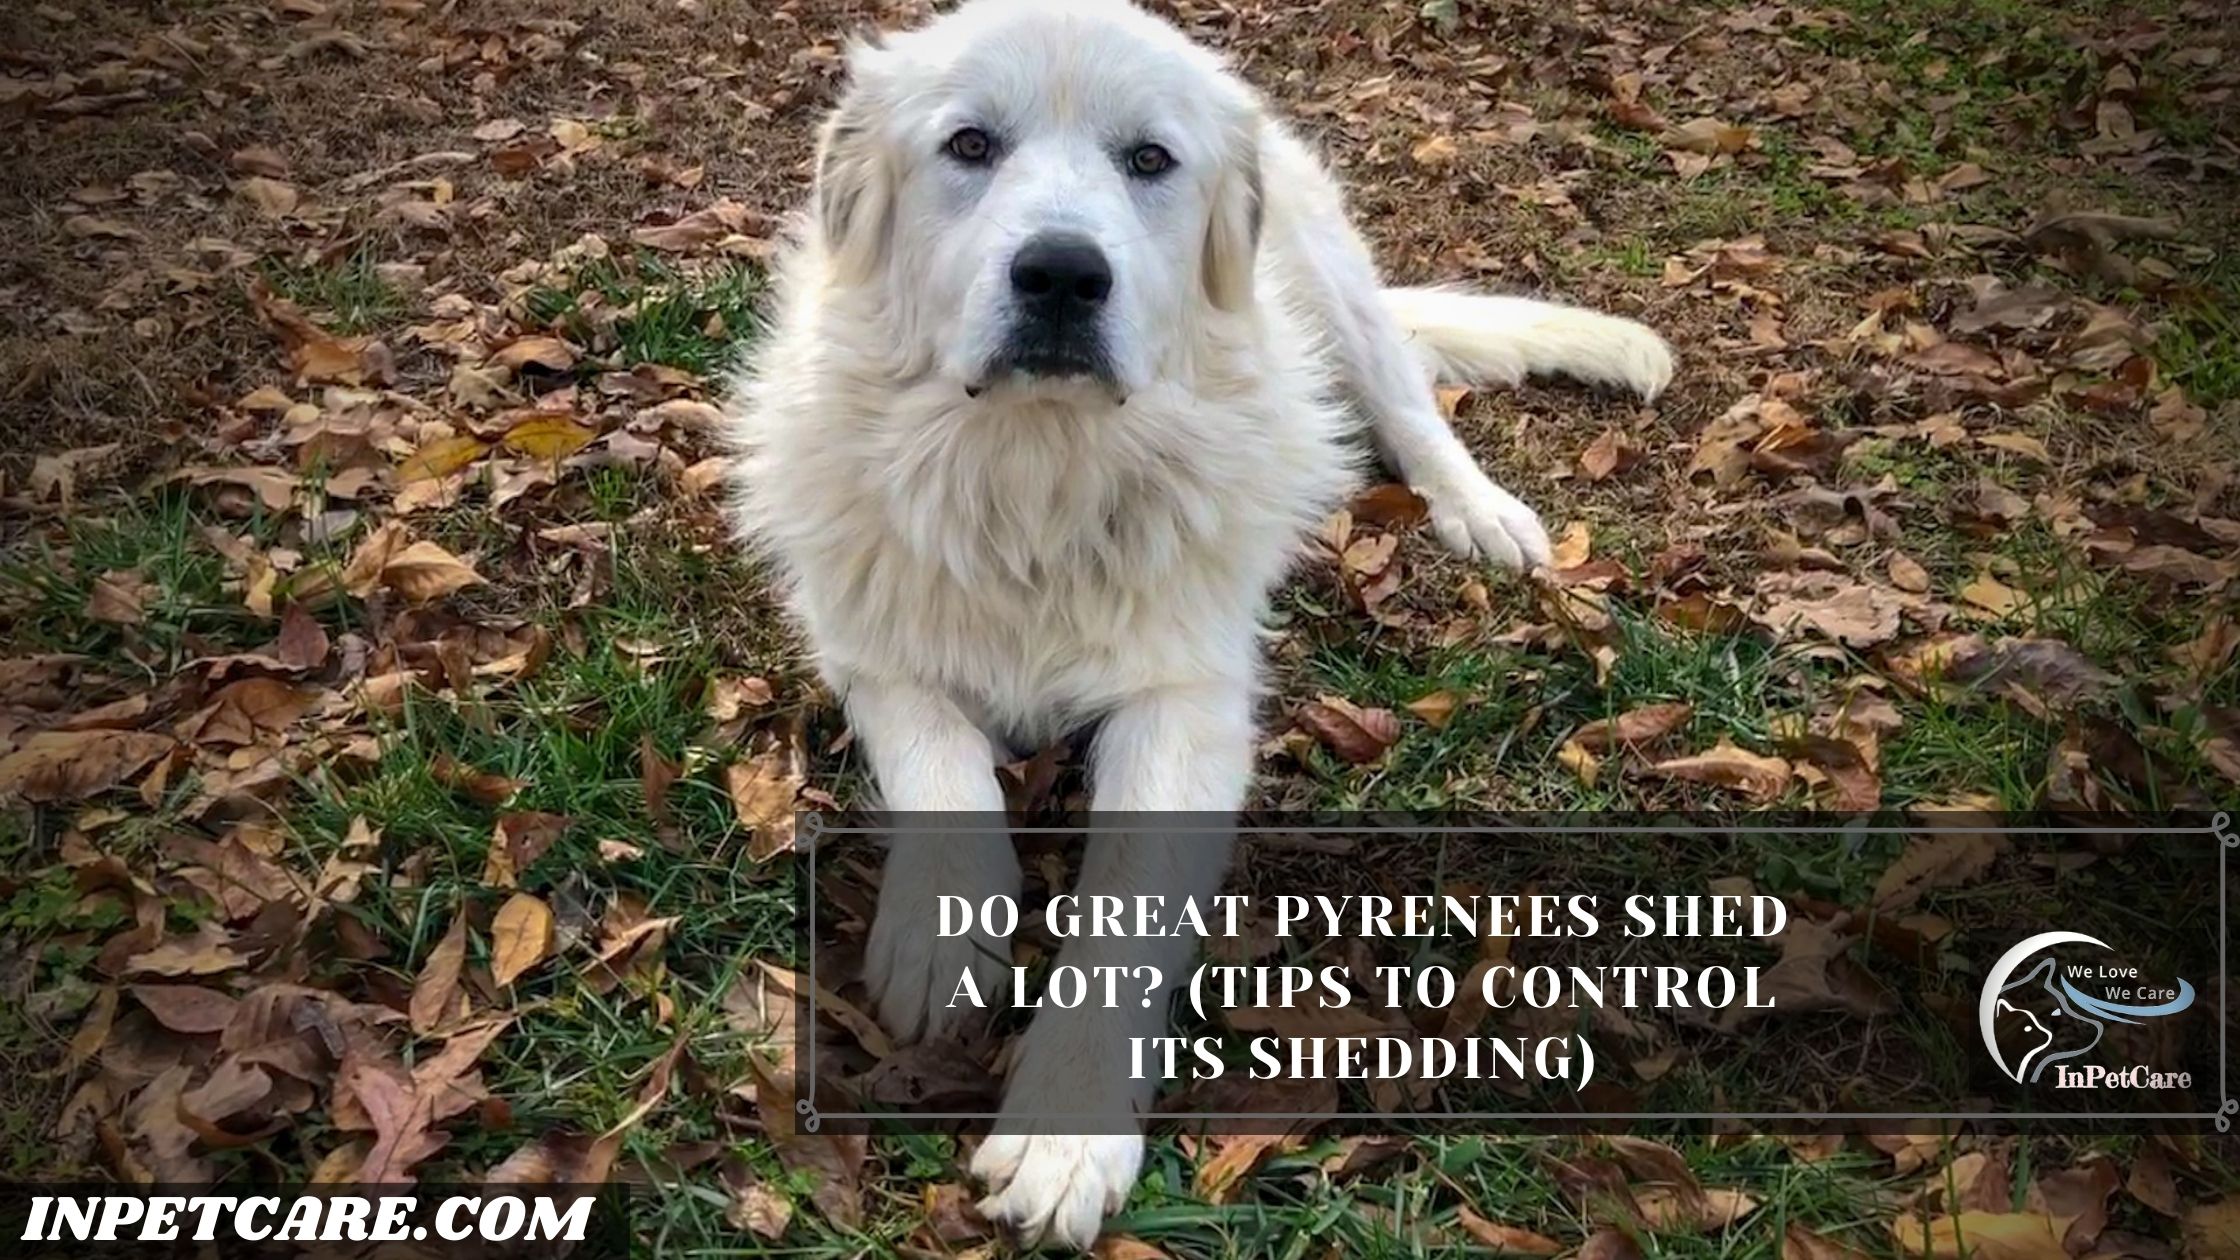 Do Great Pyrenees Shed A Lot? (Tips To Control Its Shedding)